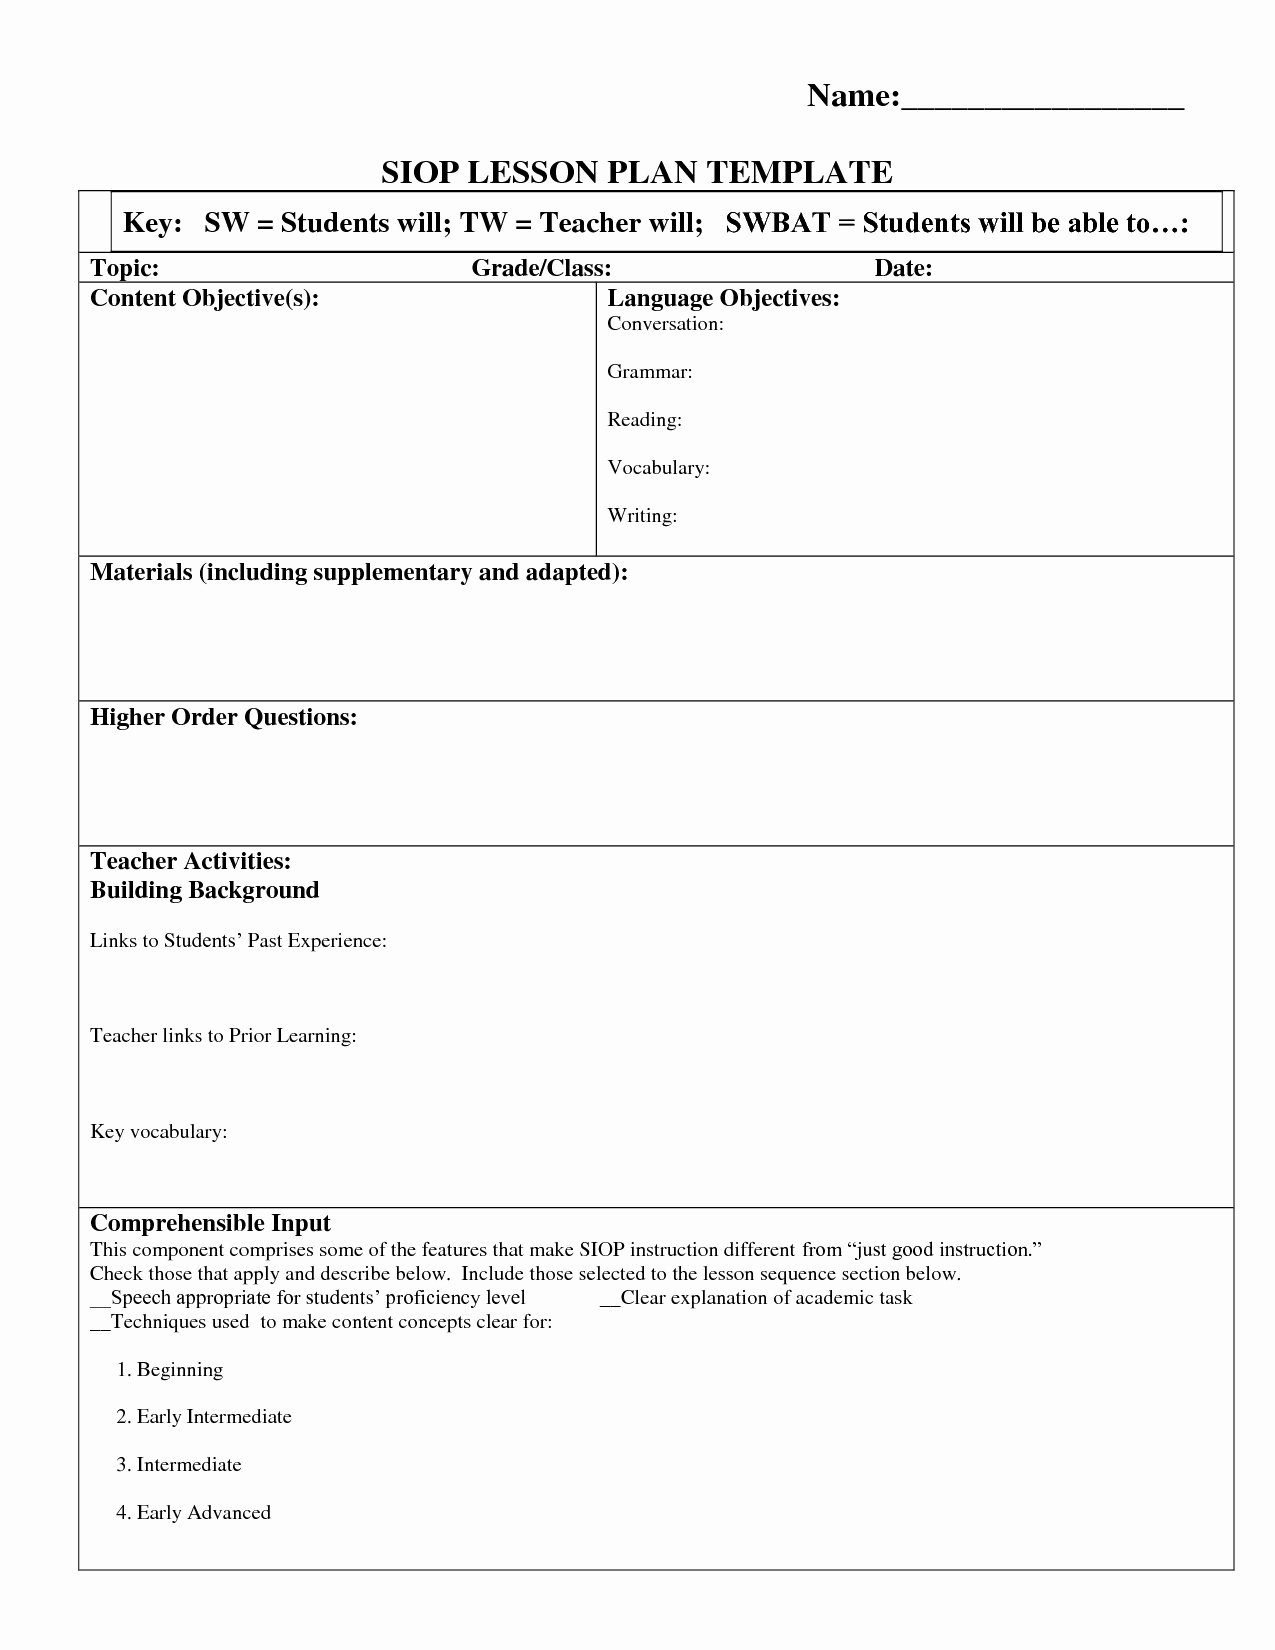 Siop Lesson Plan Template 3 Elegant Siop Lesson Plan Template